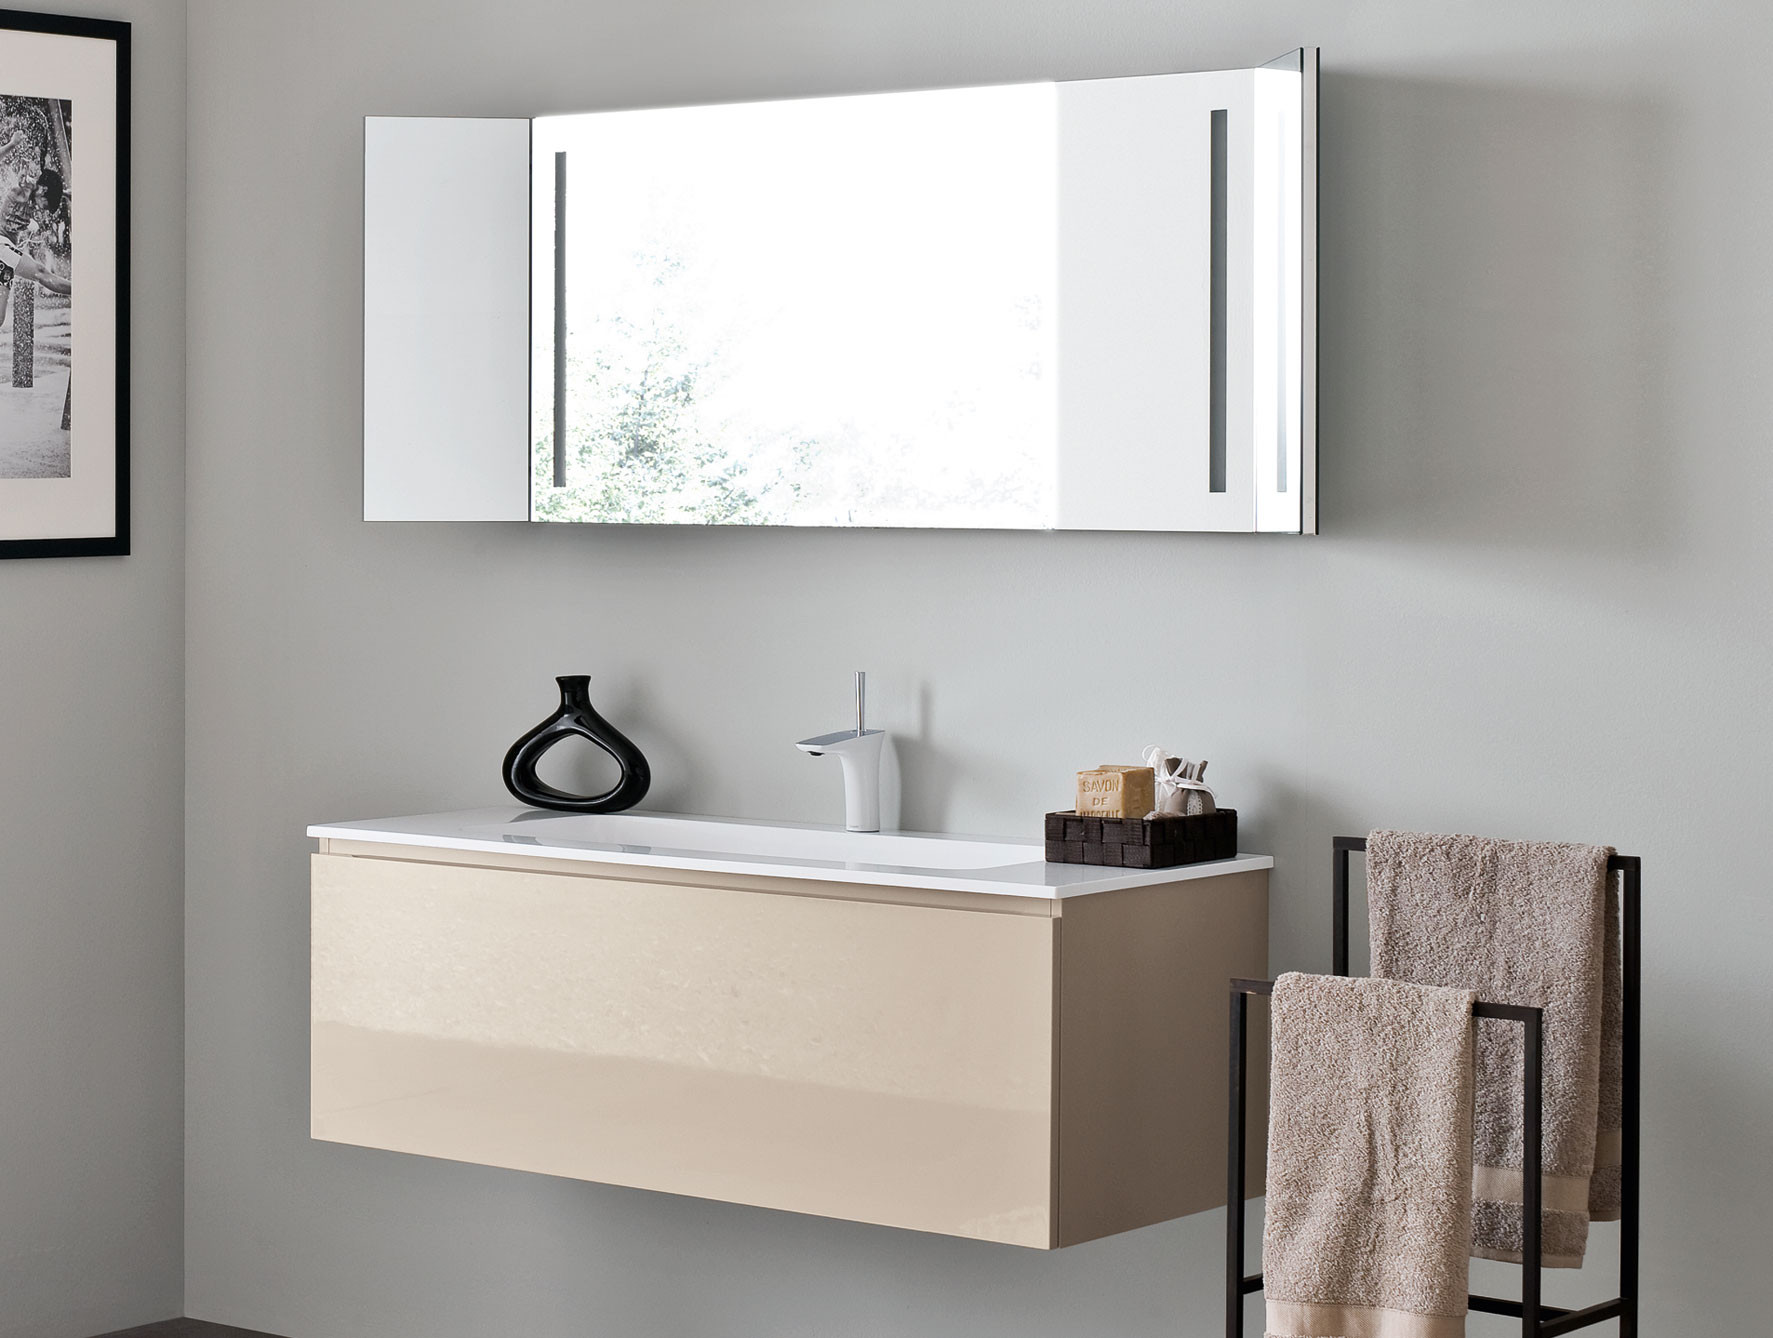 Bathroom Cabinets With Sink
 The Need of Modern Bathroom Sinks in Your House MidCityEast